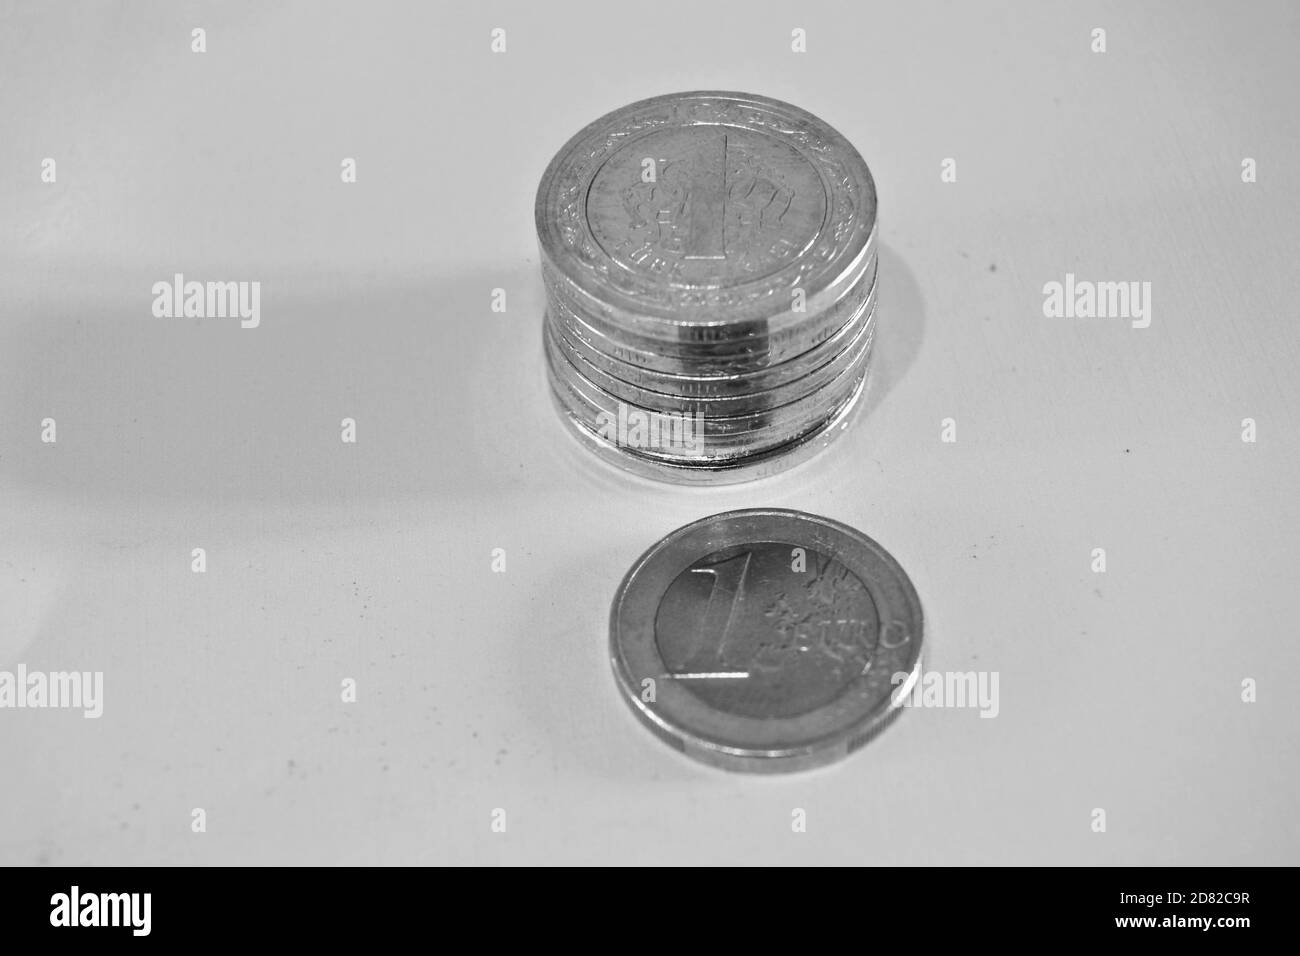 Money and currency of Turkey. Money and Groups of `One Turkish Lira` coins together and 1 euro coin. Isolated background. Black and white photo Stock Photo